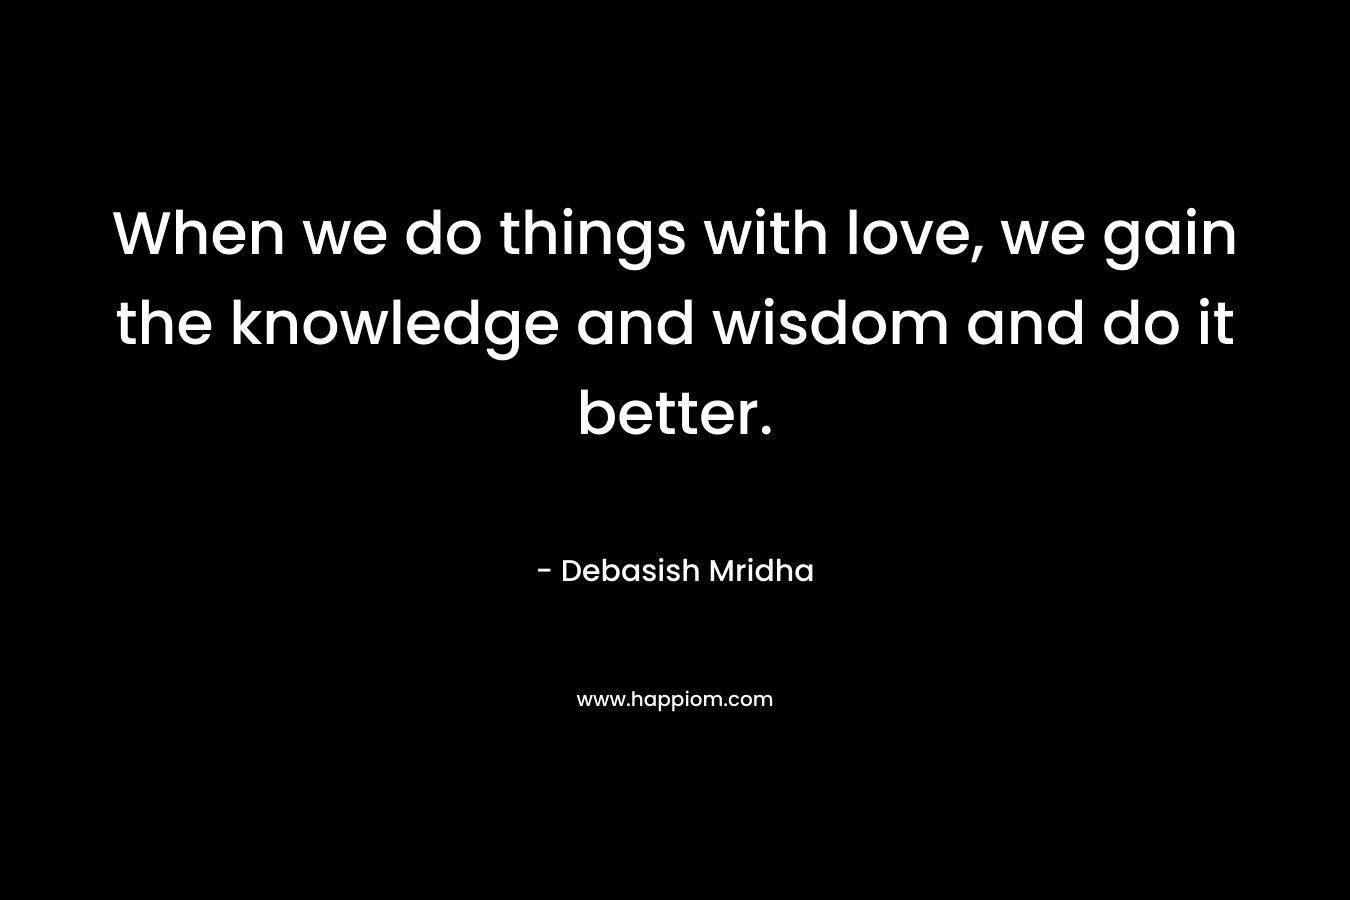 When we do things with love, we gain the knowledge and wisdom and do it better.